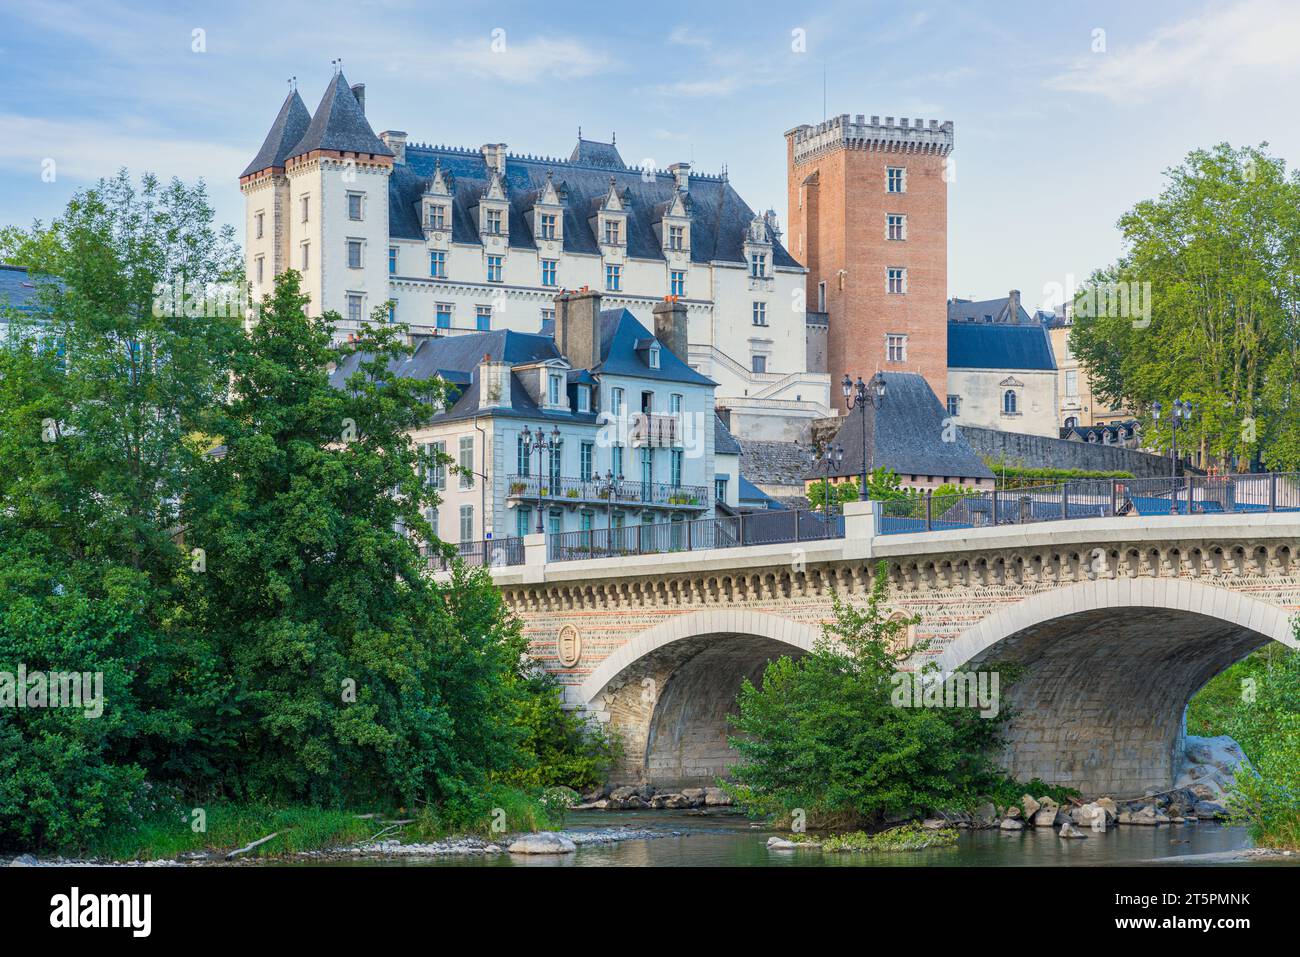 Scenic view of Pau, a famous city in France, featuring the Château de Pau and the river Stock Photo